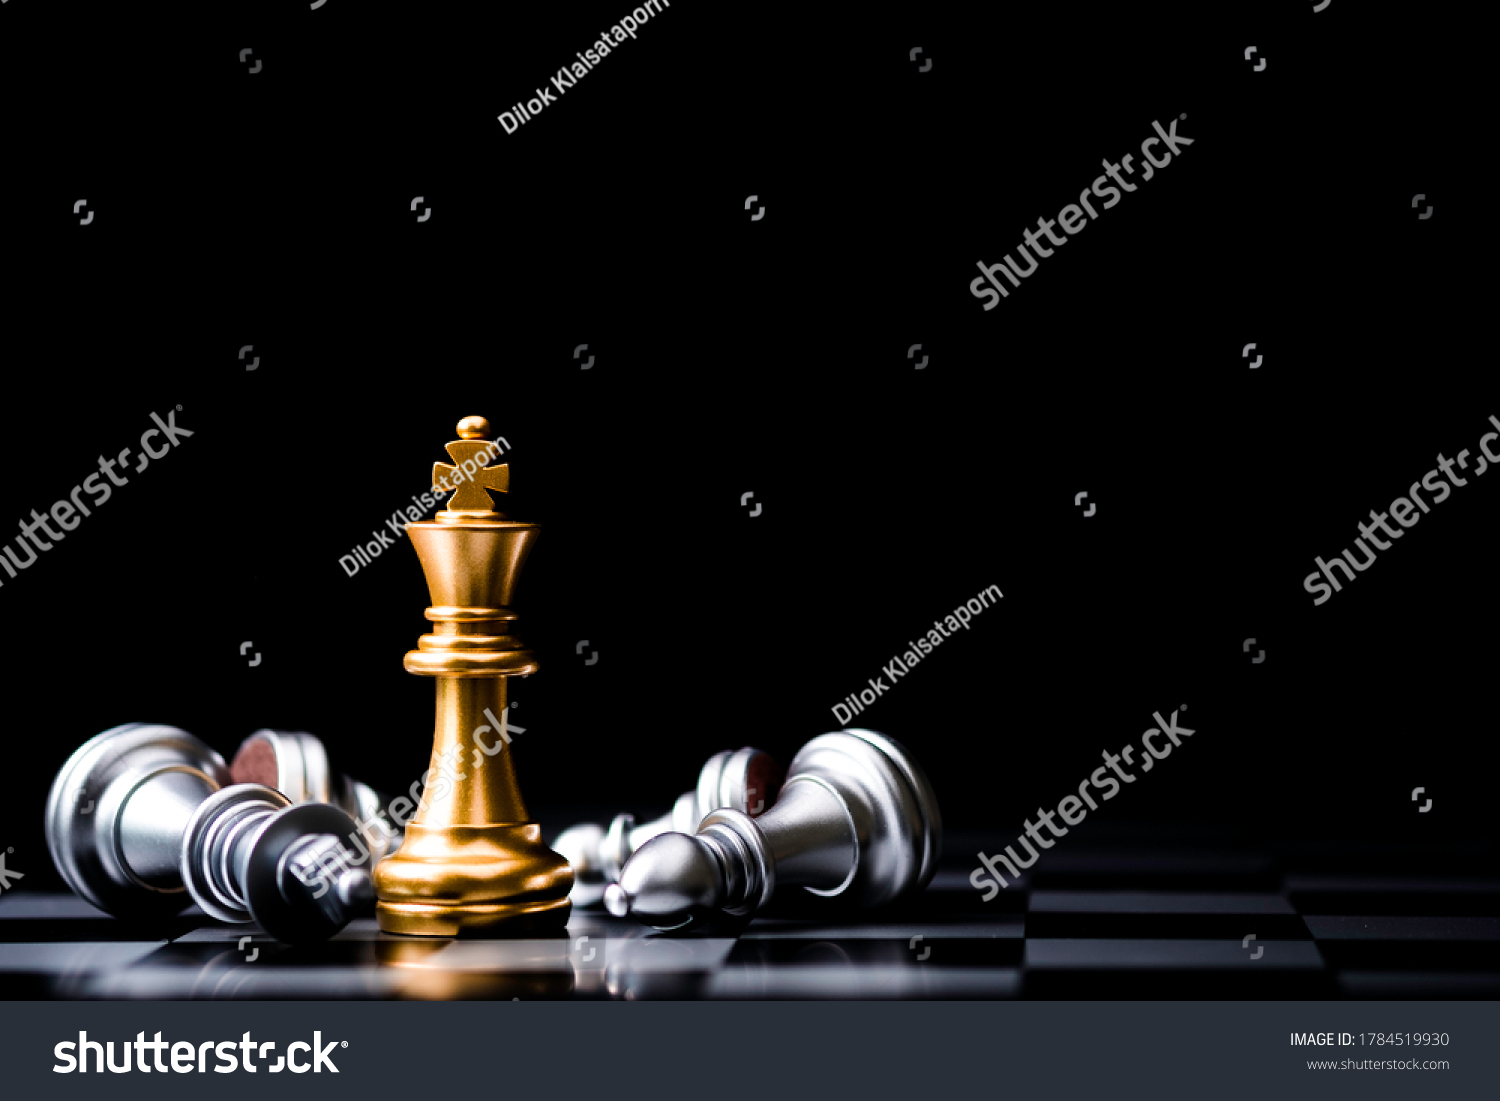 Stand of golden king chess and fallen silver king chess. Winner of business competition and marketing strategy planing concept. #1784519930